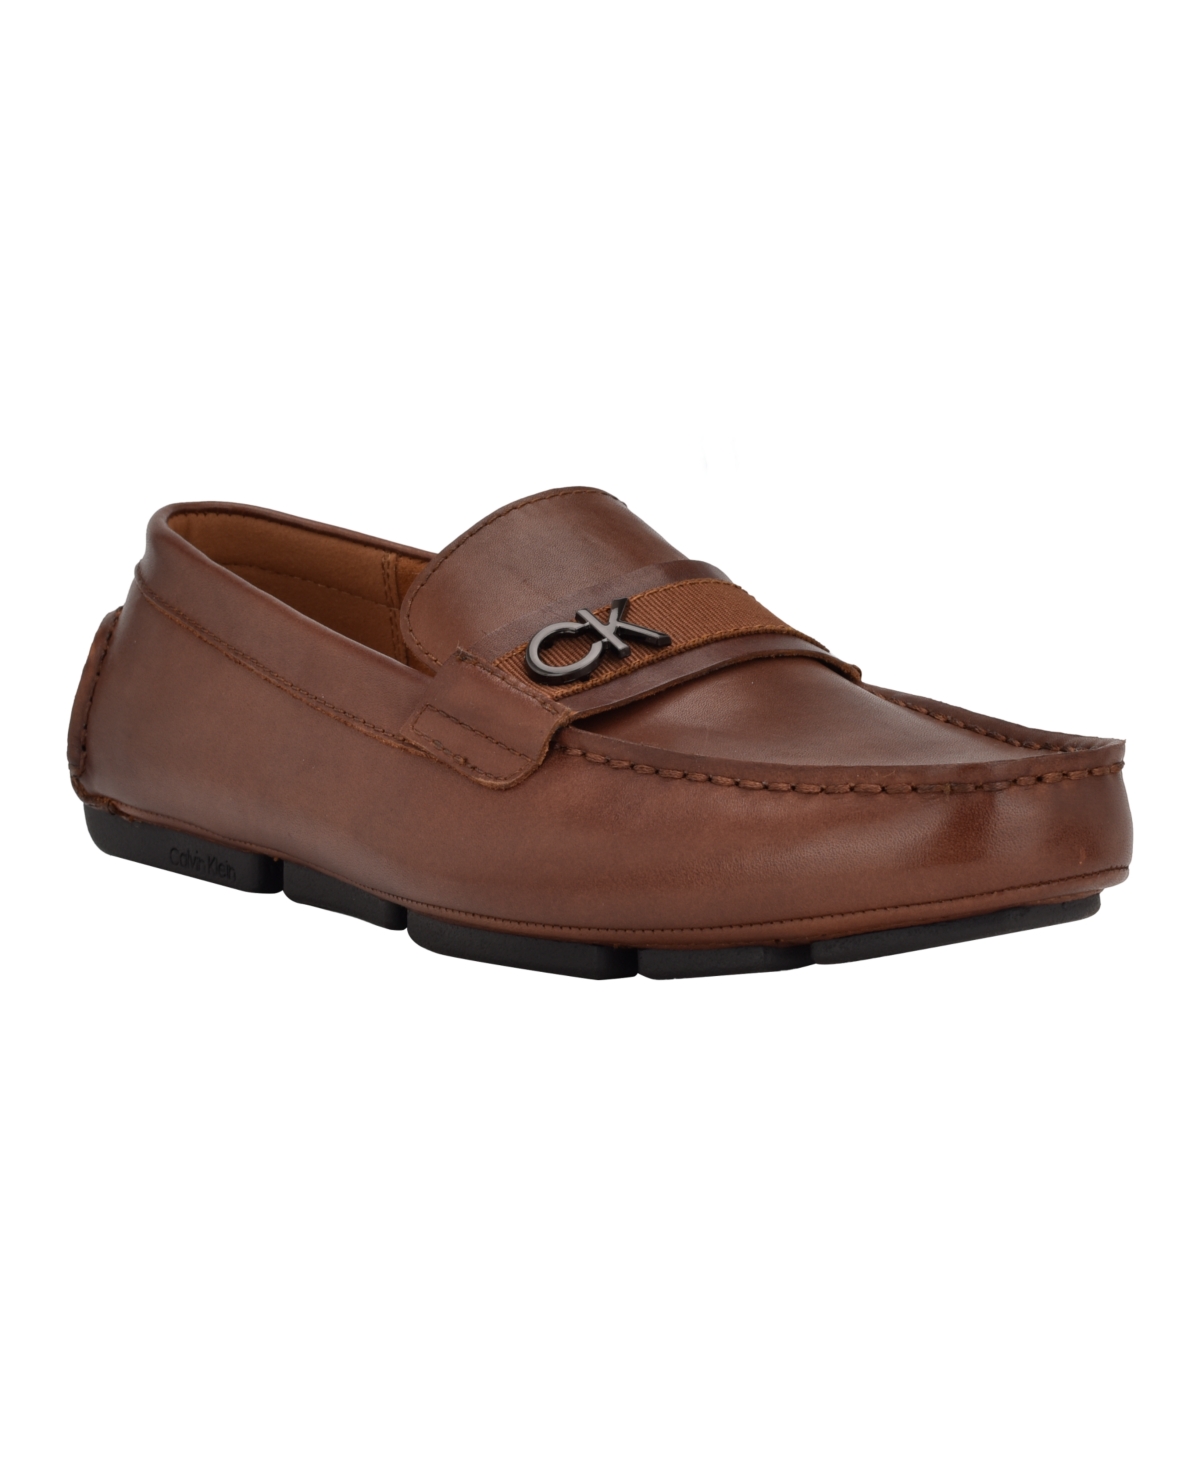 Calvin Klein Men's Martin Casual Slip-on Loafers In Medium Brown Leather